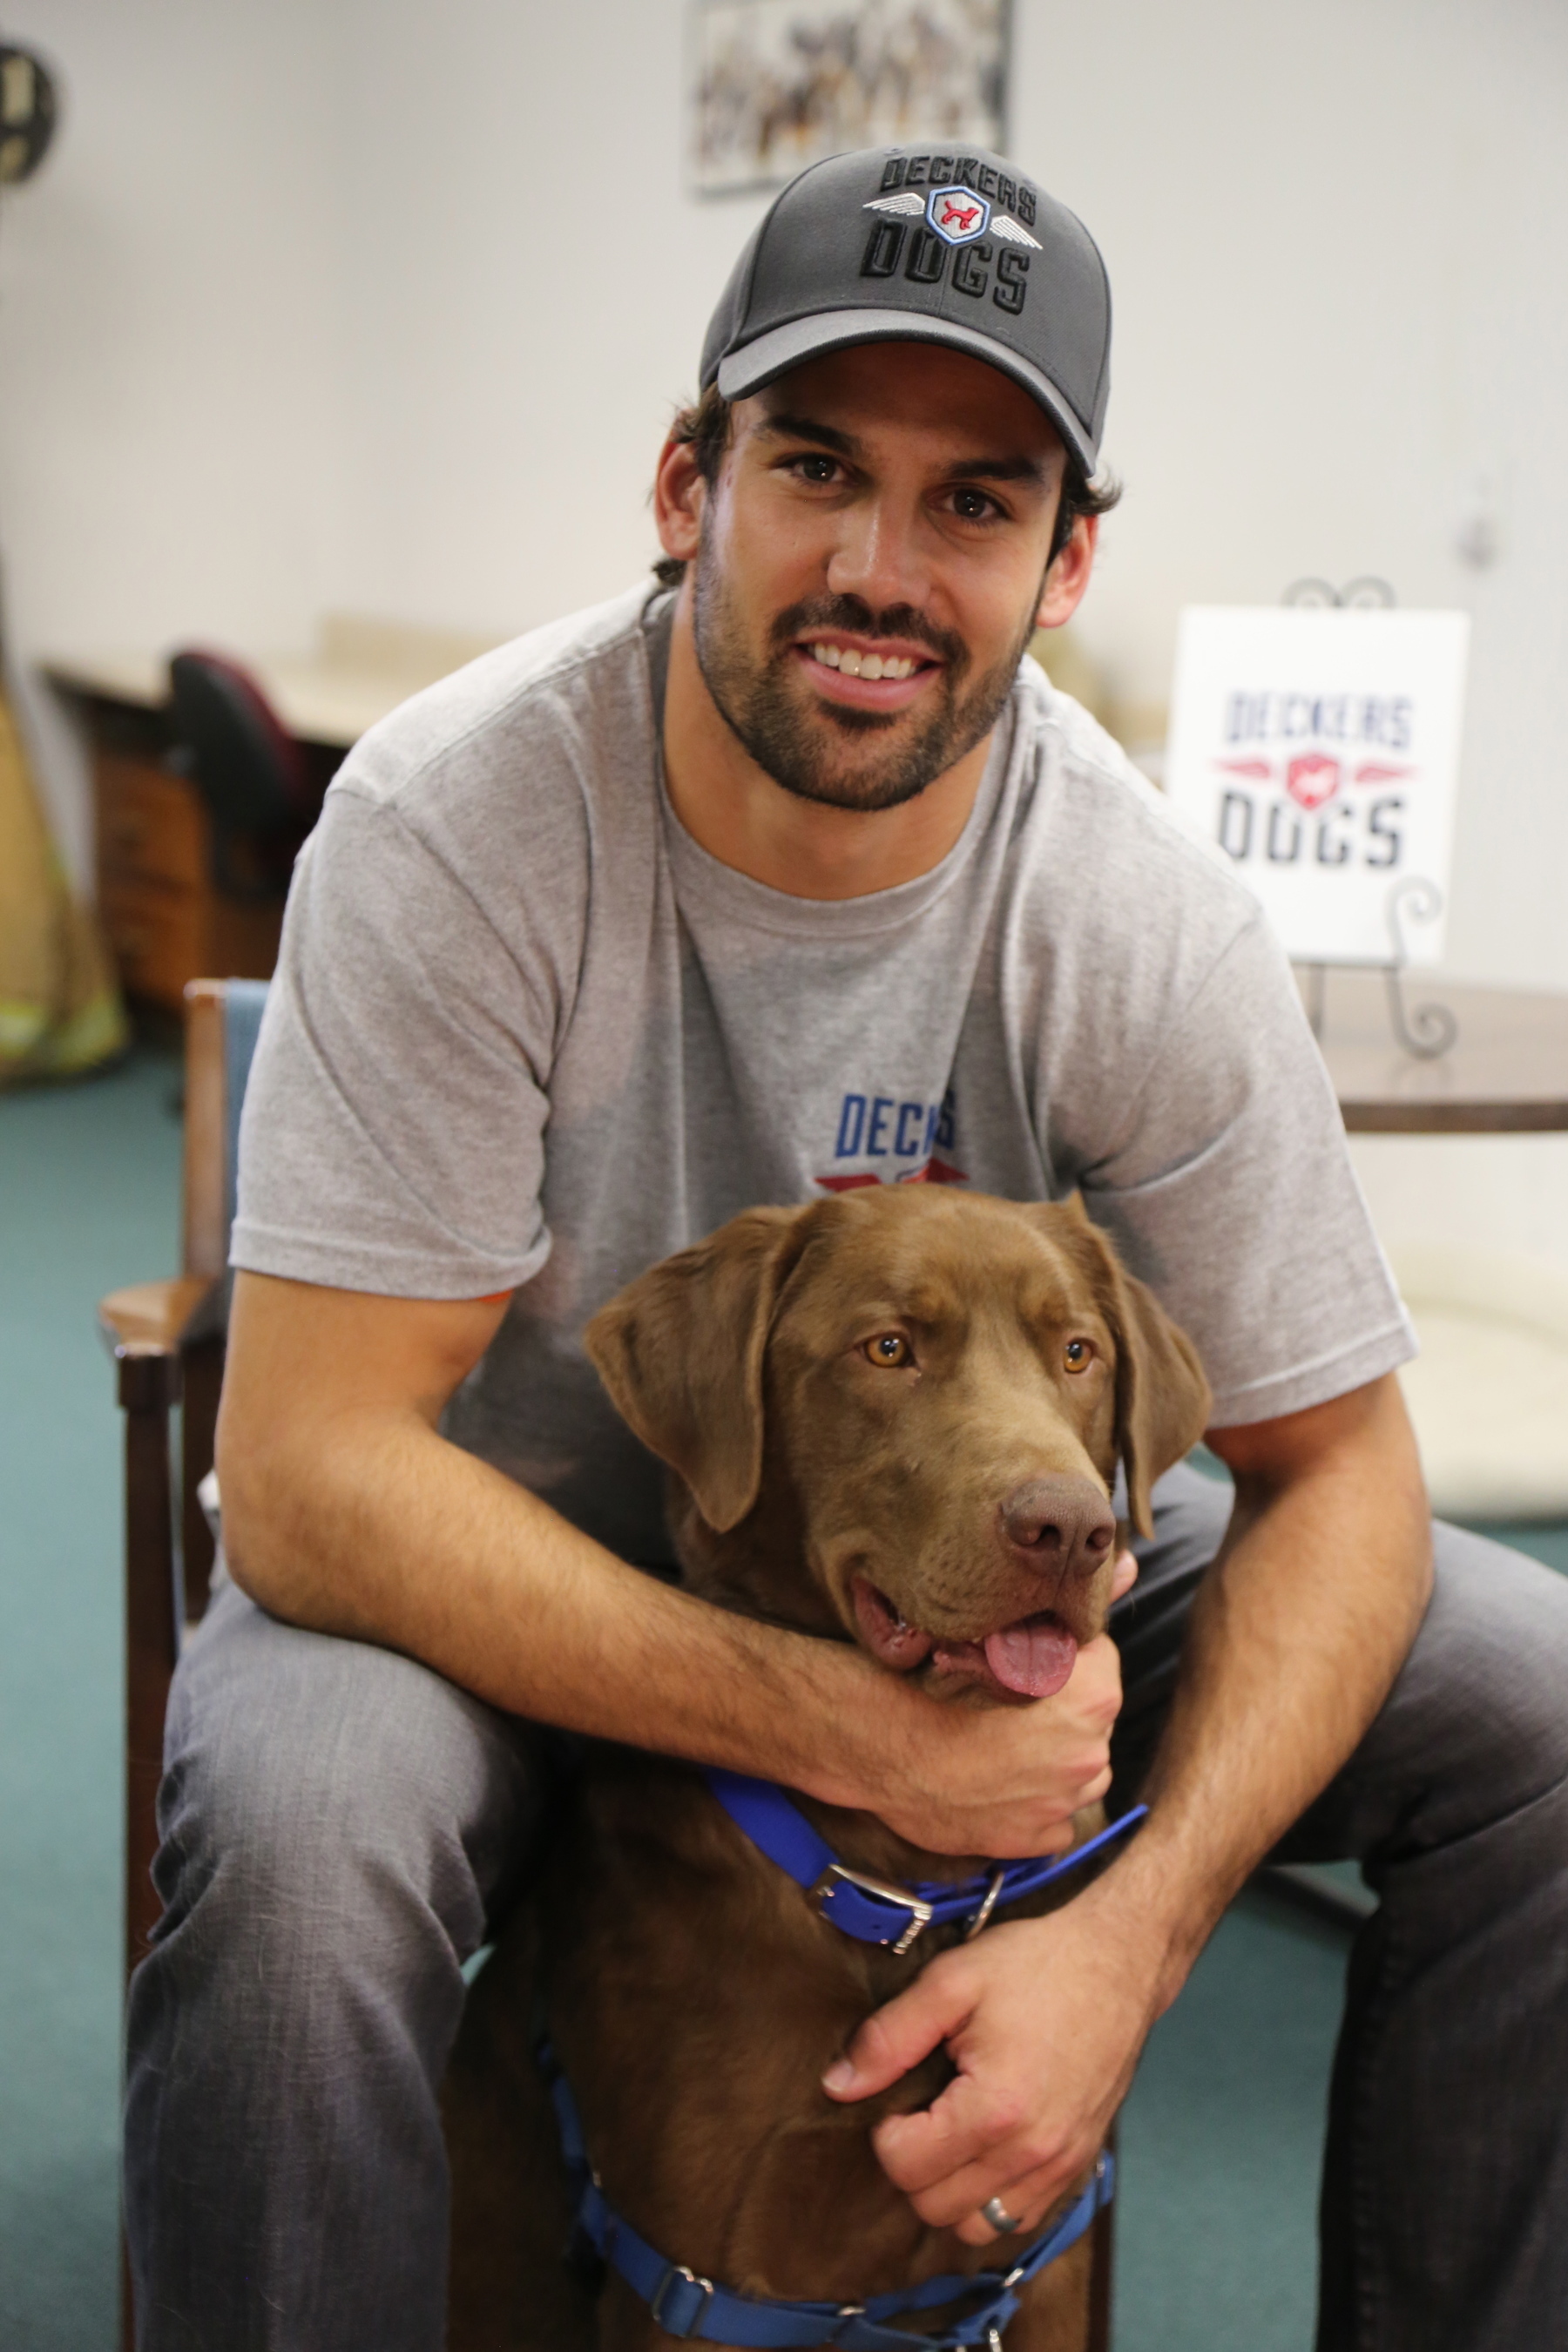 NY Jets' Eric Decker and "Deckers Dogs" Team with Veterinary Pet Insurance (VPI) to Celebrate Pet Parent's Day. For every new quote generated at petparentsday.com through Memorial Day (May 26), VPI will donate $5 to Deckers Dogs to help fund the rescue, care and training of service dogs for our military veterans returning home with disabilities. (PRNewsFoto/Deckers Dogs)